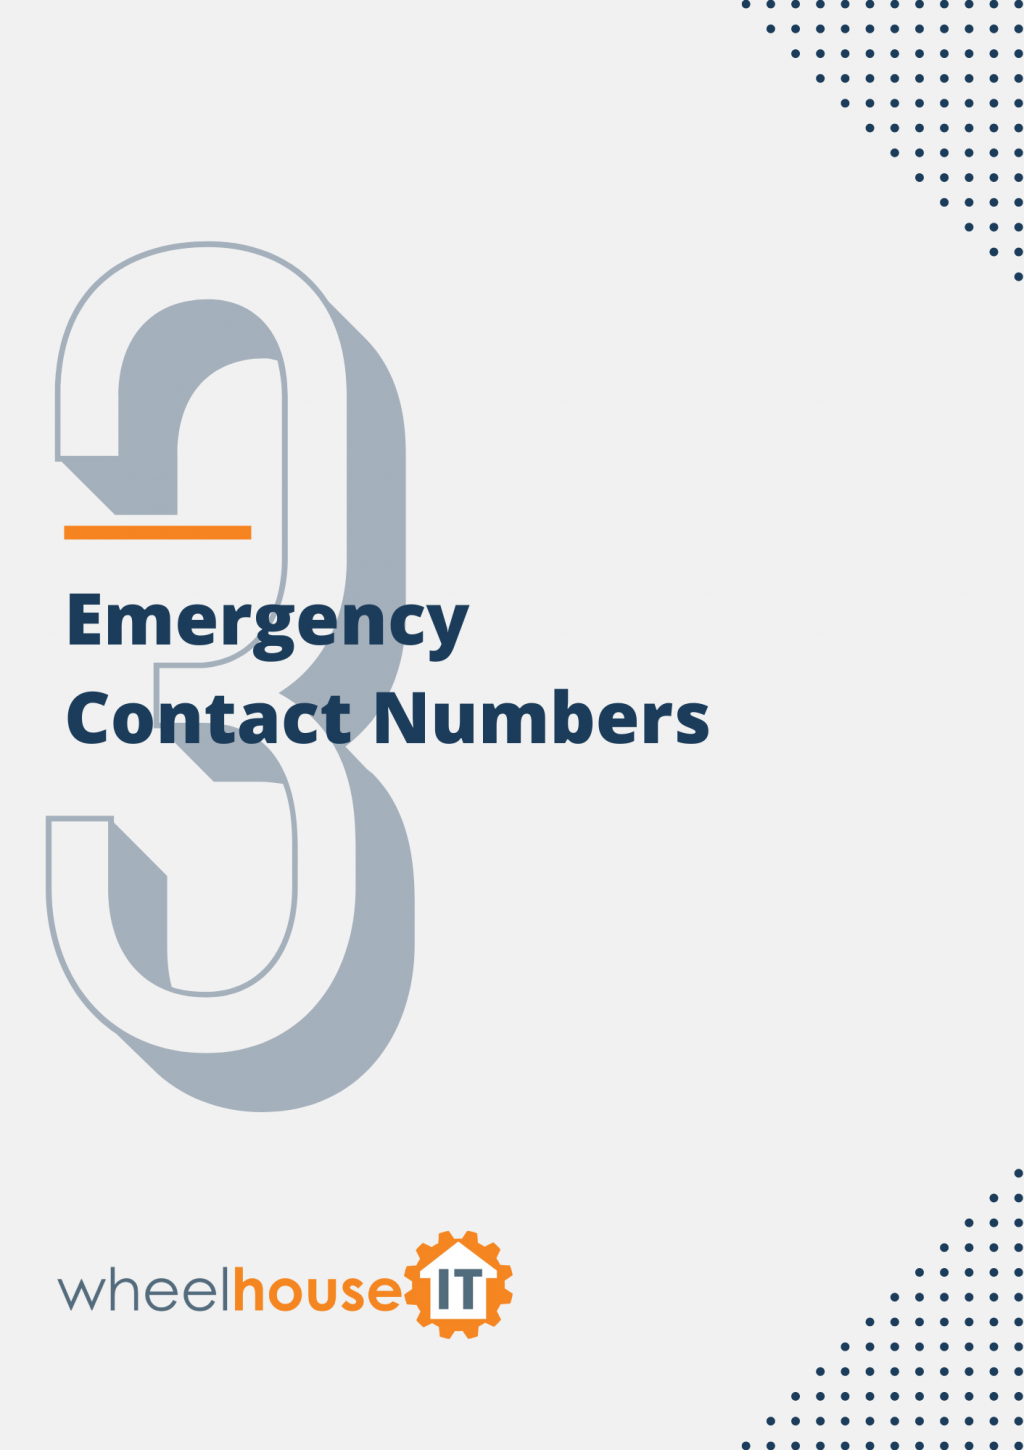 an image of emergency contact numbers